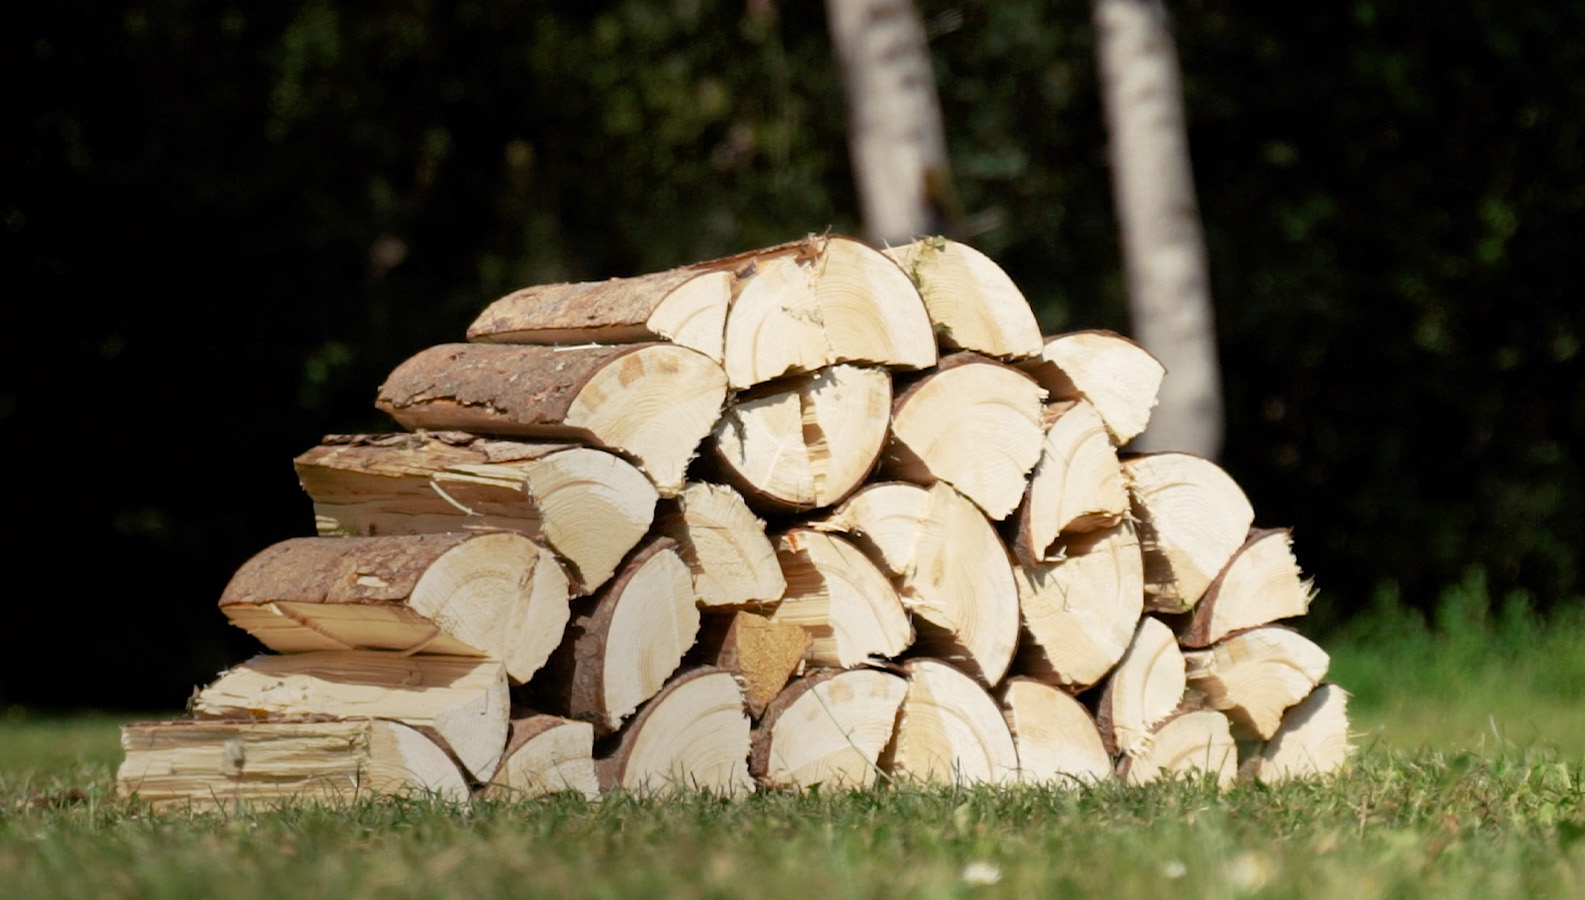 Log stack after cutting firewood